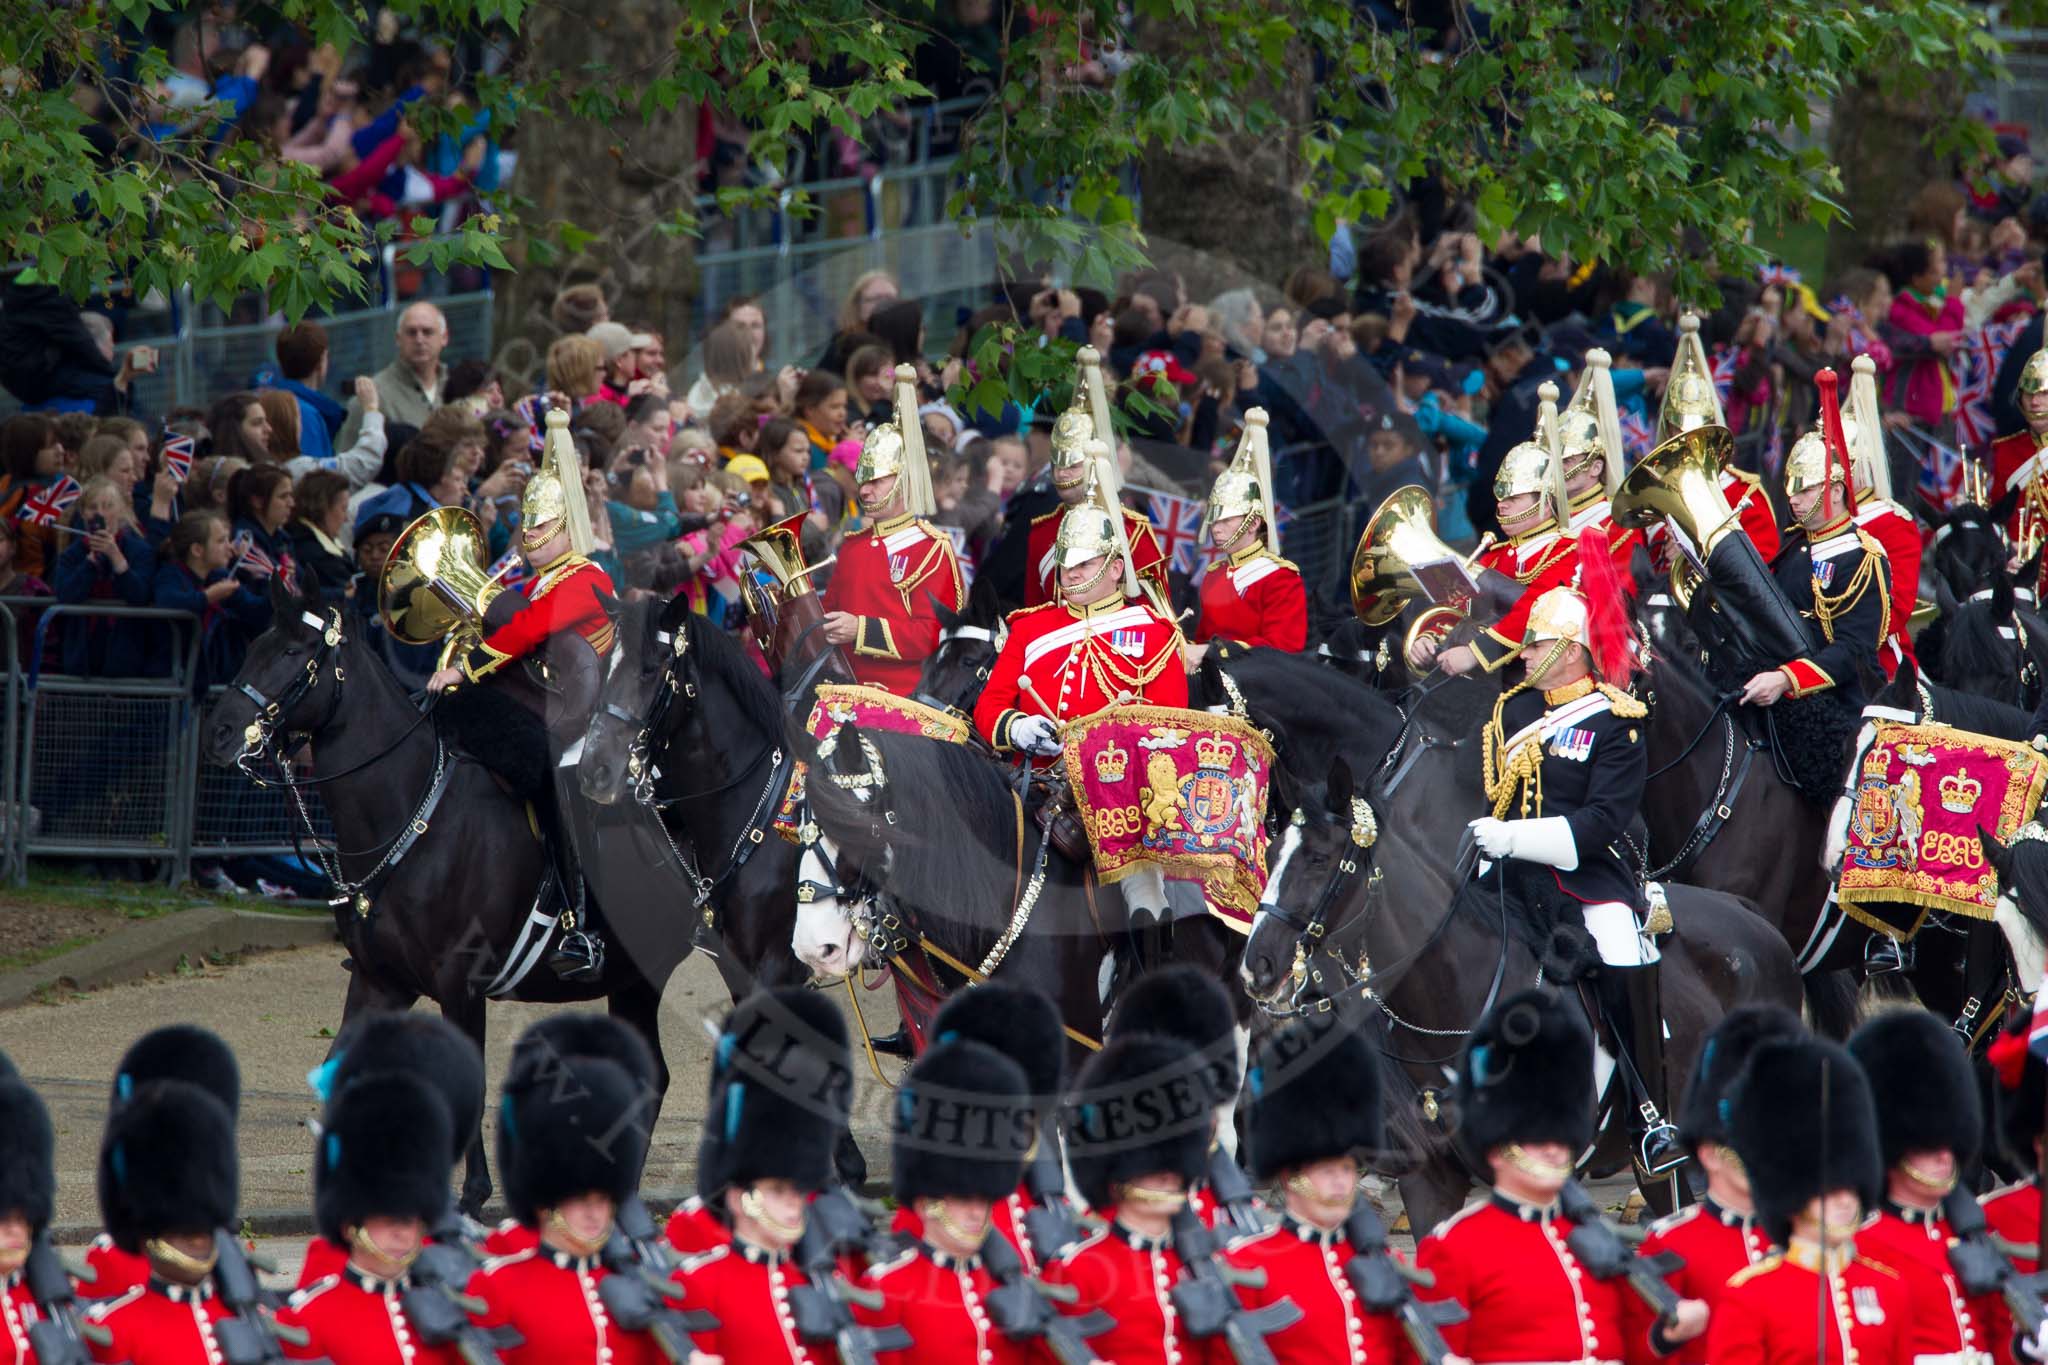 The Colonel's Review 2012: Approaching their position on the St James's Park side of Horse Guards Parade, the Mounted Bands of the Household Cavalry, here the Life Guards, with the Kettle Drummer in front..
Horse Guards Parade, Westminster,
London SW1,

United Kingdom,
on 09 June 2012 at 10:55, image #136